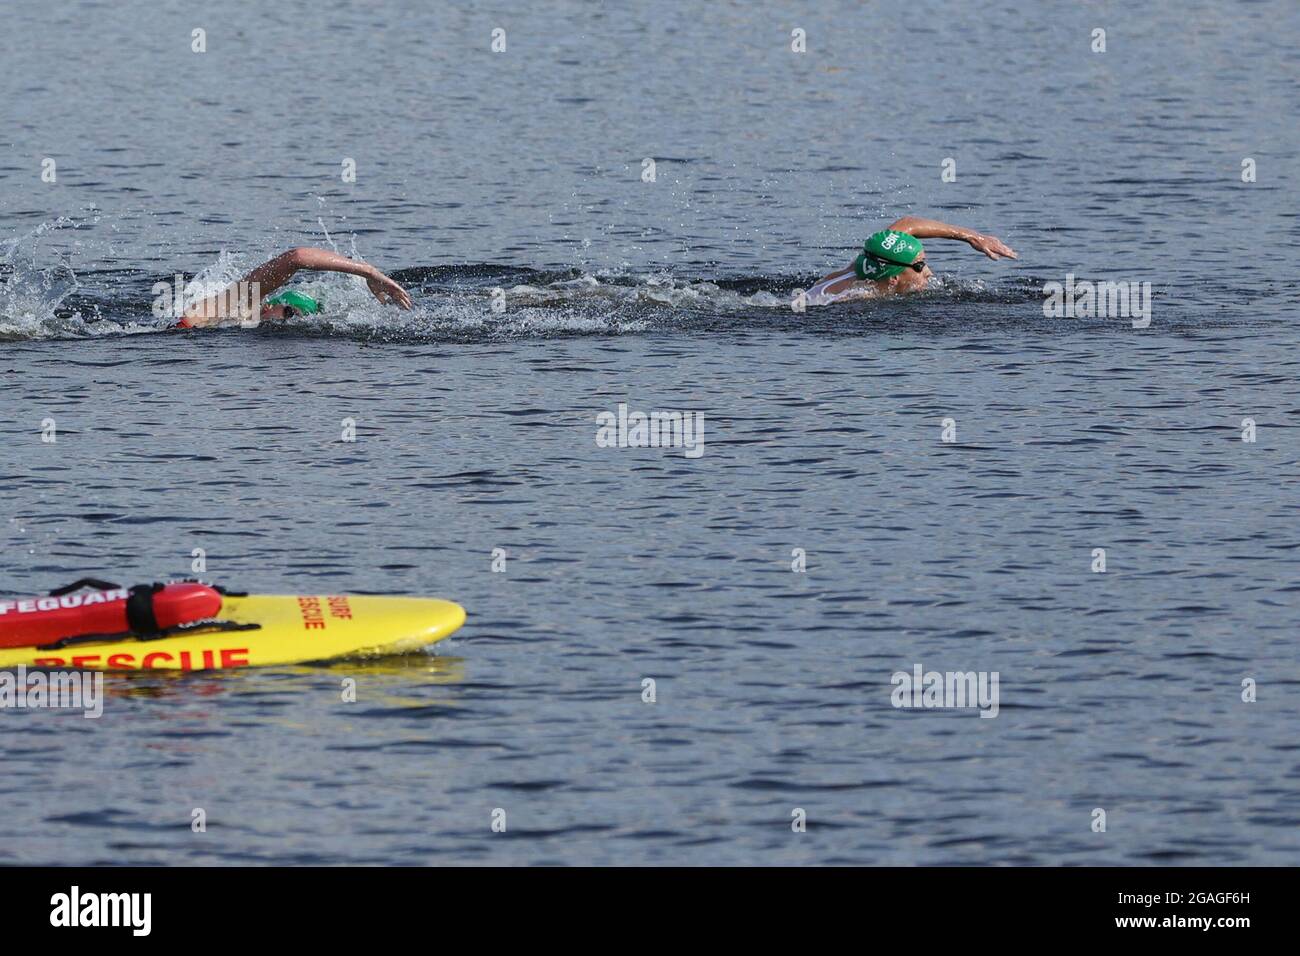 Tokyo, Japan. 31st July, 2021. Jessica Learmonth (R) of Great Britain competes during the triathlon mixed relay of the Tokyo 2020 Olympic Games in Tokyo, Japan, July 31, 2021. Credit: Zheng Huansong/Xinhua/Alamy Live News Stock Photo